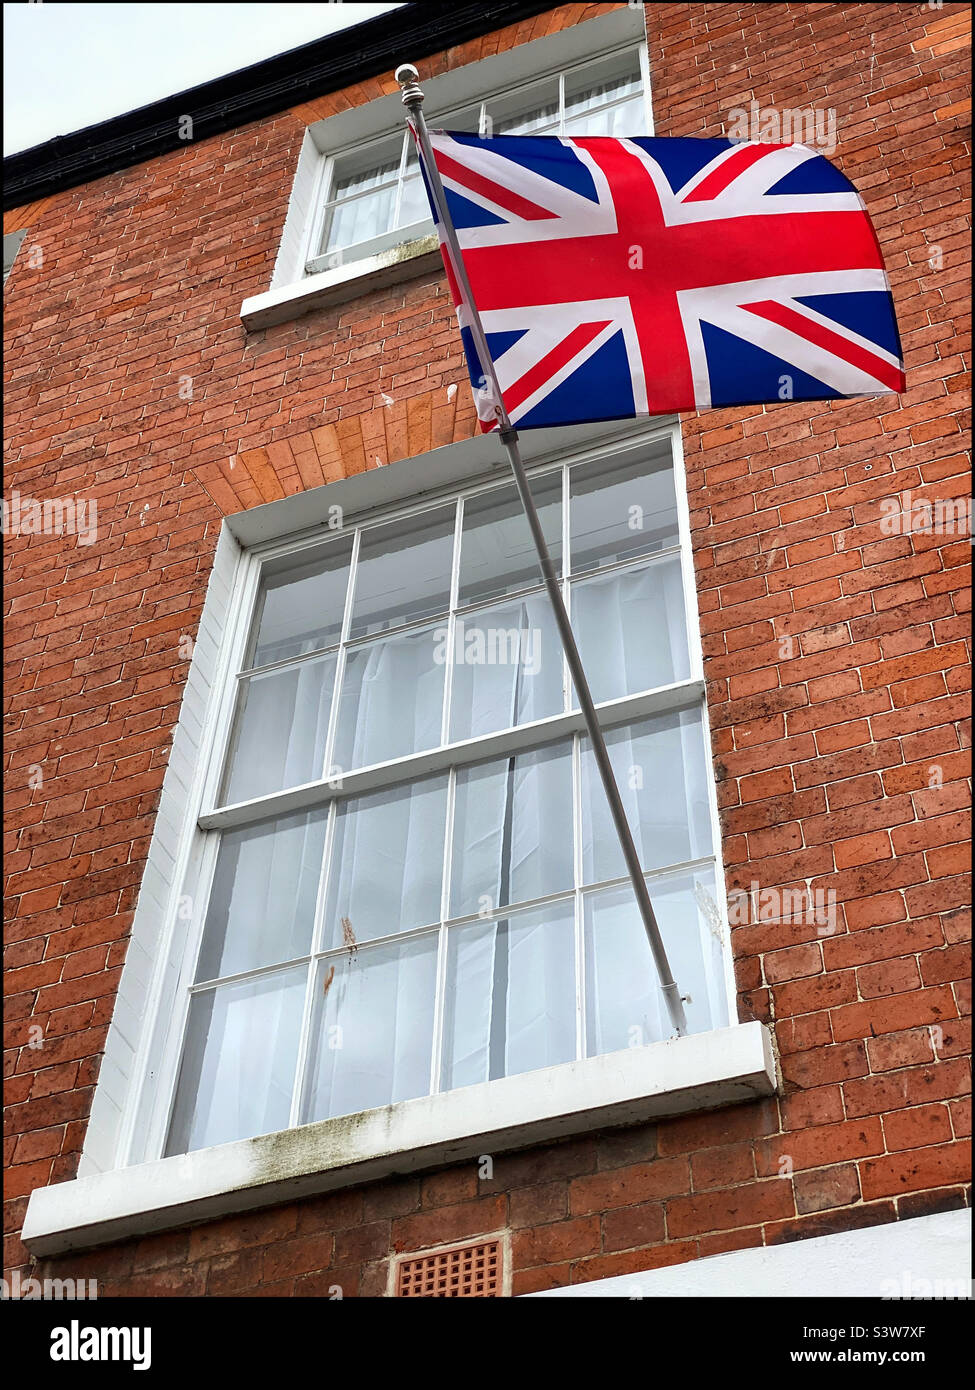 The flag of the United Kingdom (The Union Jack) flutters outside the window of a house somewhere in Great Britain. Photo ©️ COLIN HOSKINS. Stock Photo